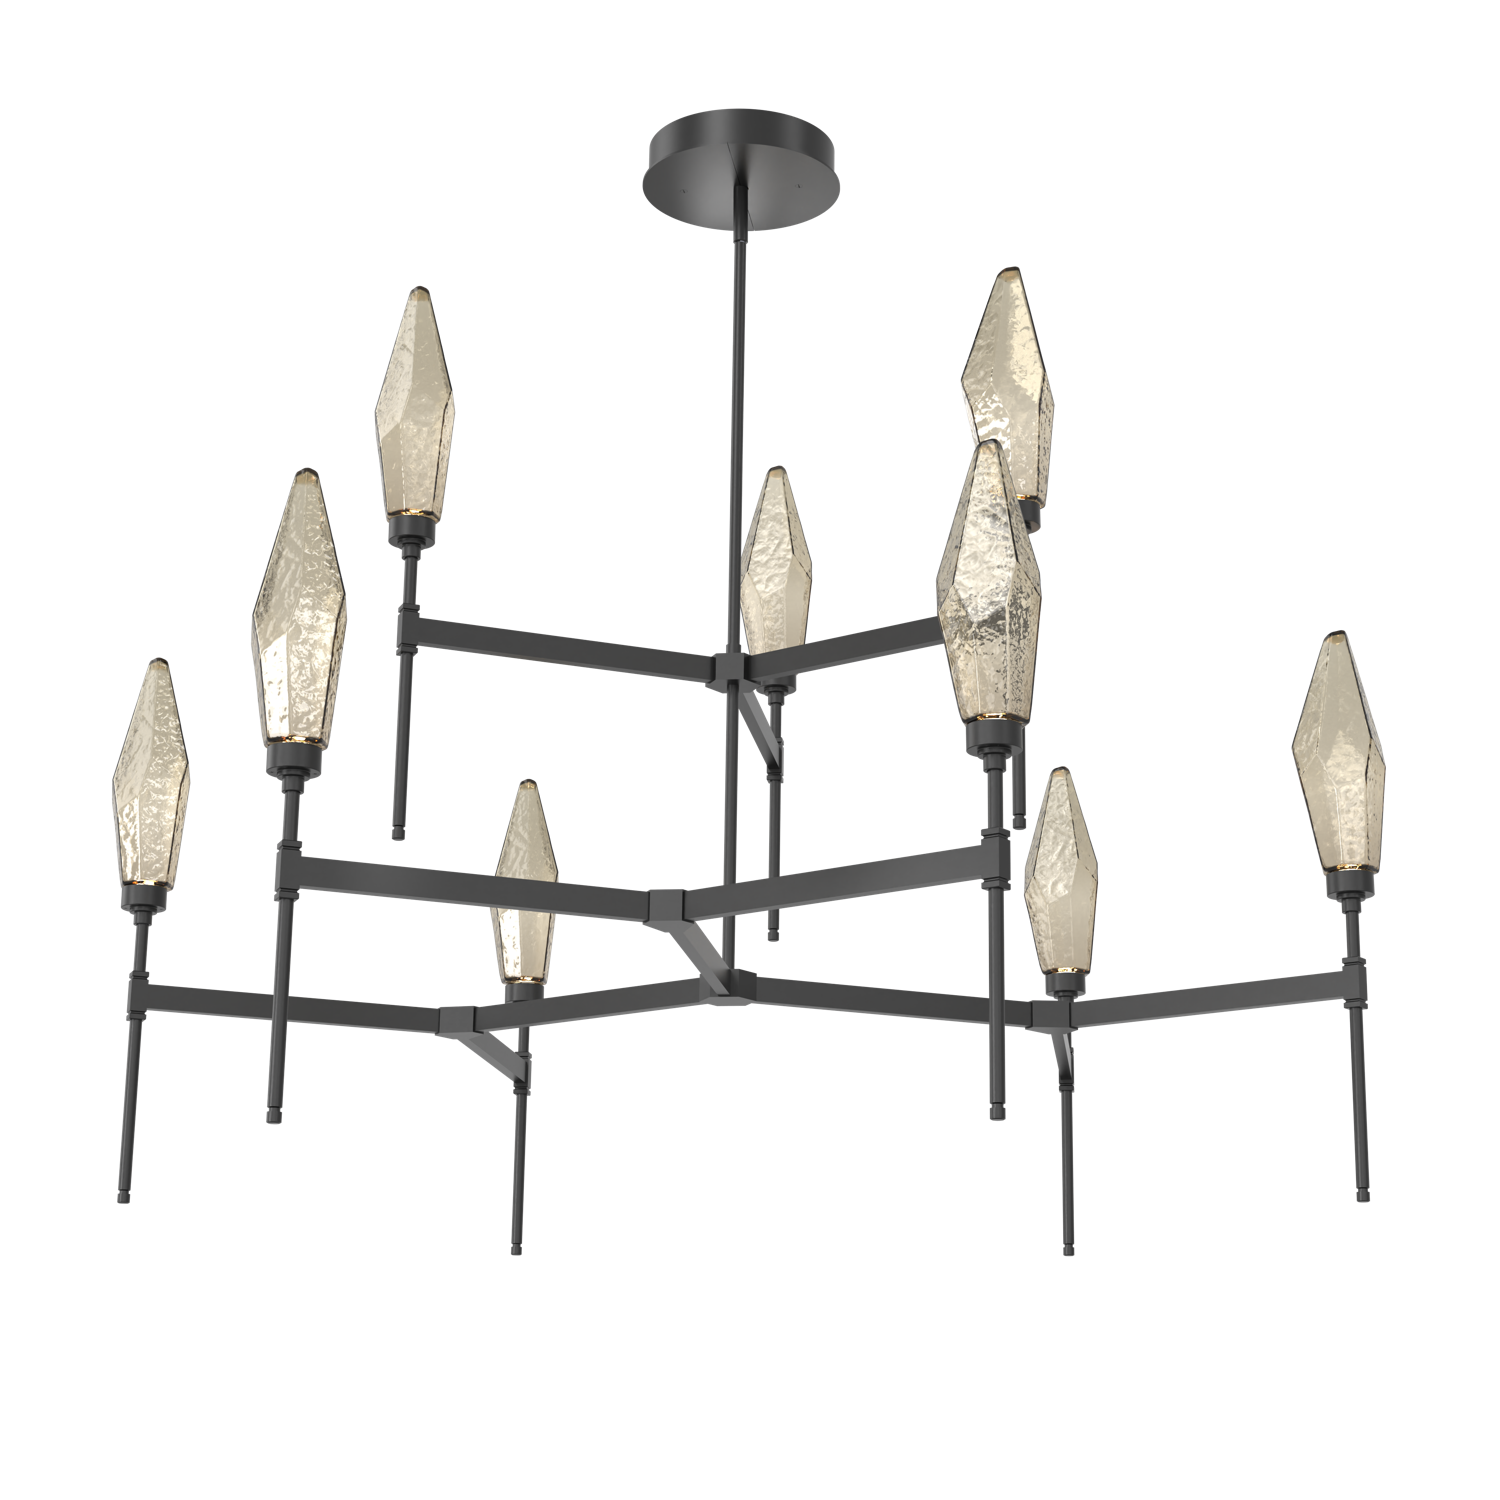 CHB0050-54-MB-CB-Hammerton-Studio-Rock-Crystal-54-inch-round-two-tier-belvedere-chandelier-with-matte-black-finish-and-chilled-bronze-blown-glass-shades-and-LED-lamping